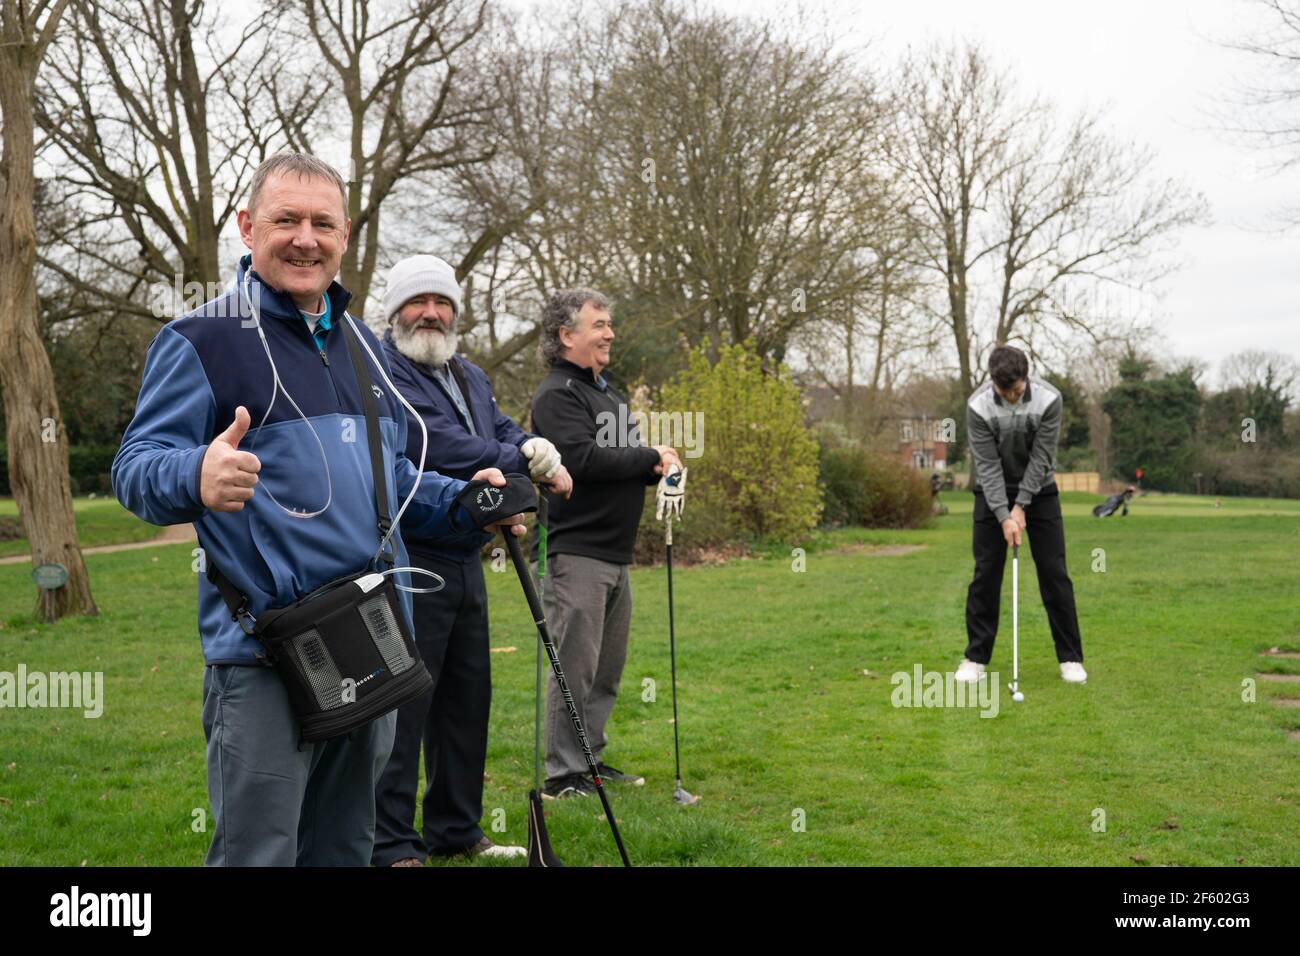 London, UK. March 29, 2021, London, UK: Covid survivor, David Sheridan, prepares to tee off at Brent Valley Golf Course on the day golf returns as part of the government’s roadmap out of lockdown. Mr Sheridan, who still carries an oxygen machine and monitors his oxygen levels, was in intensive care for one month with covid-19 and was discharged on March 5. Past captain at Brent Valley Golf Club, he planned to play 18 holes but was accompanied by his brother in case he couldn’t complete the round. Photo: Roger Garfield/Alamy Live News Stock Photo